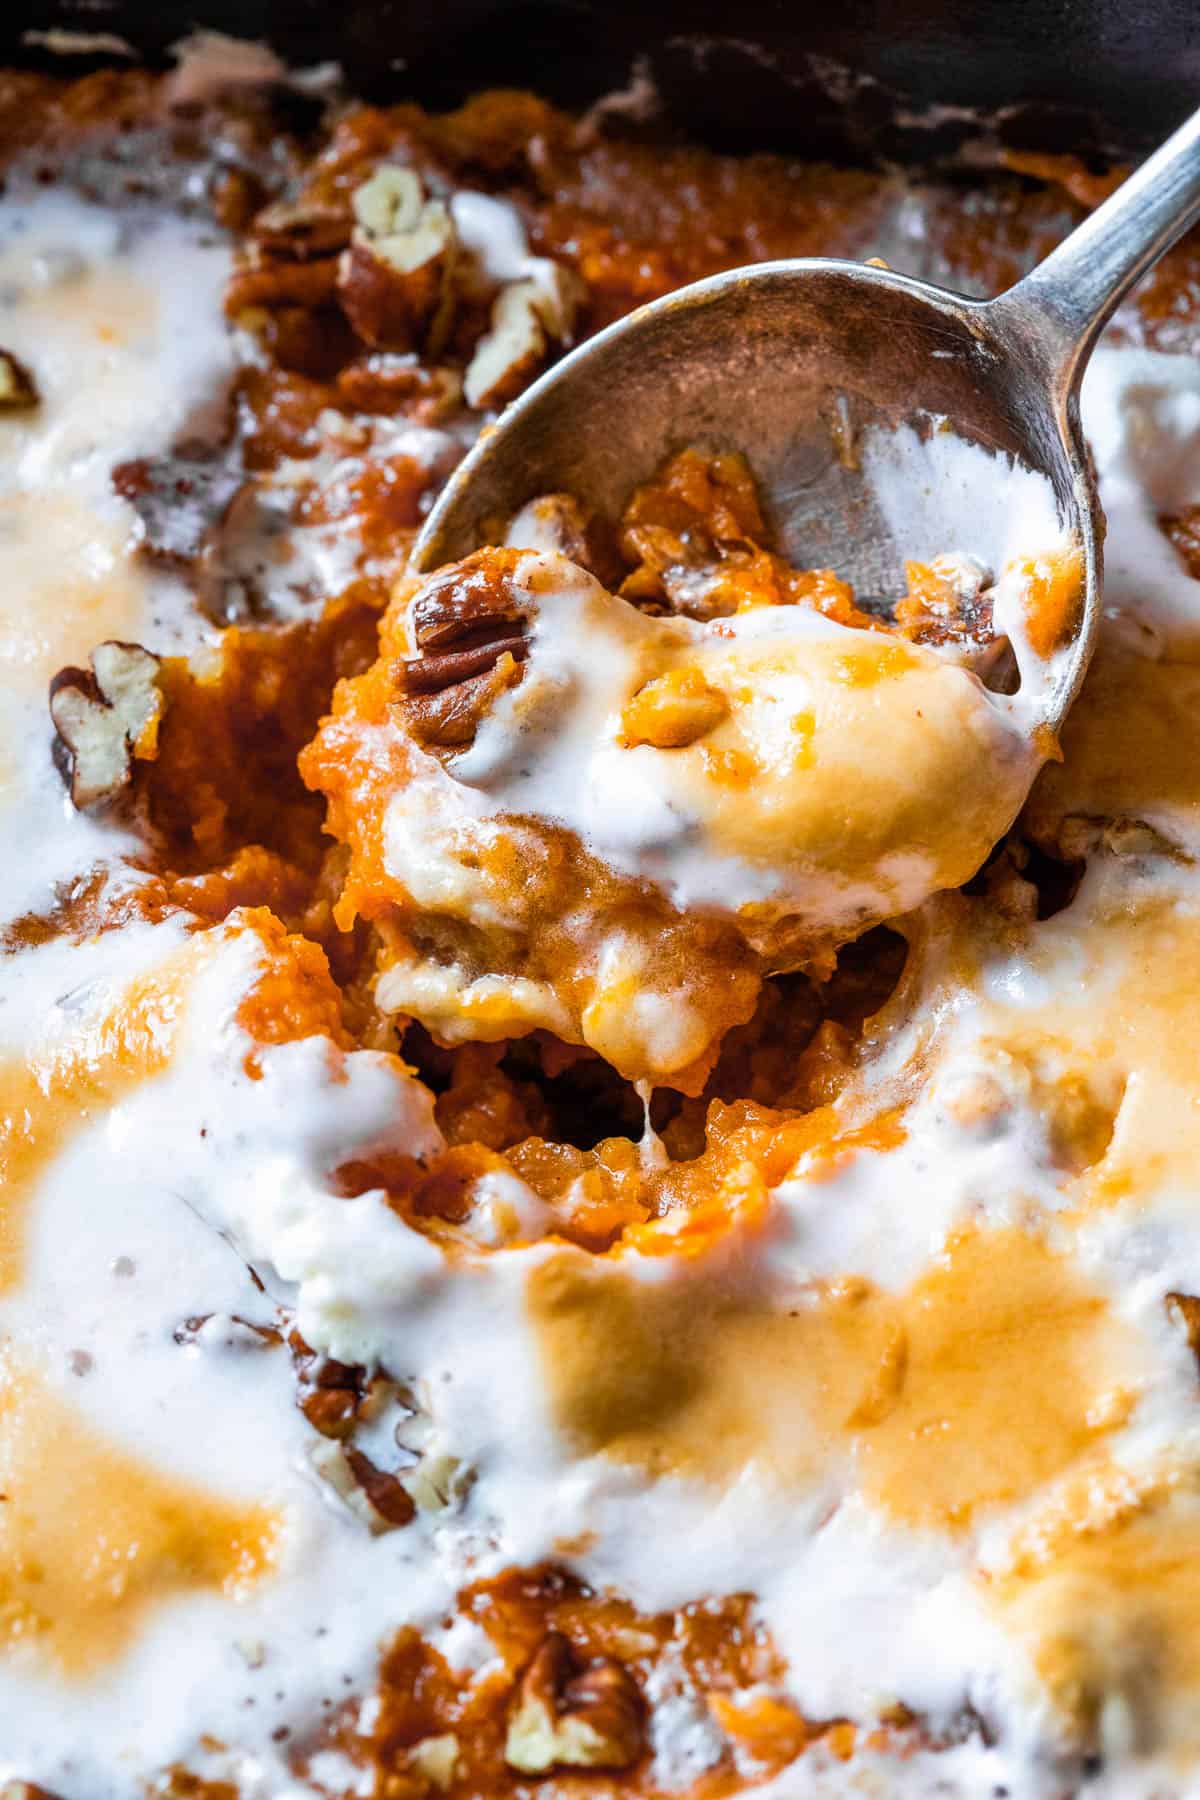 A close up shot of sweet potato casserole, showing the texture of the casserole mixture and melted marshmallow topping.